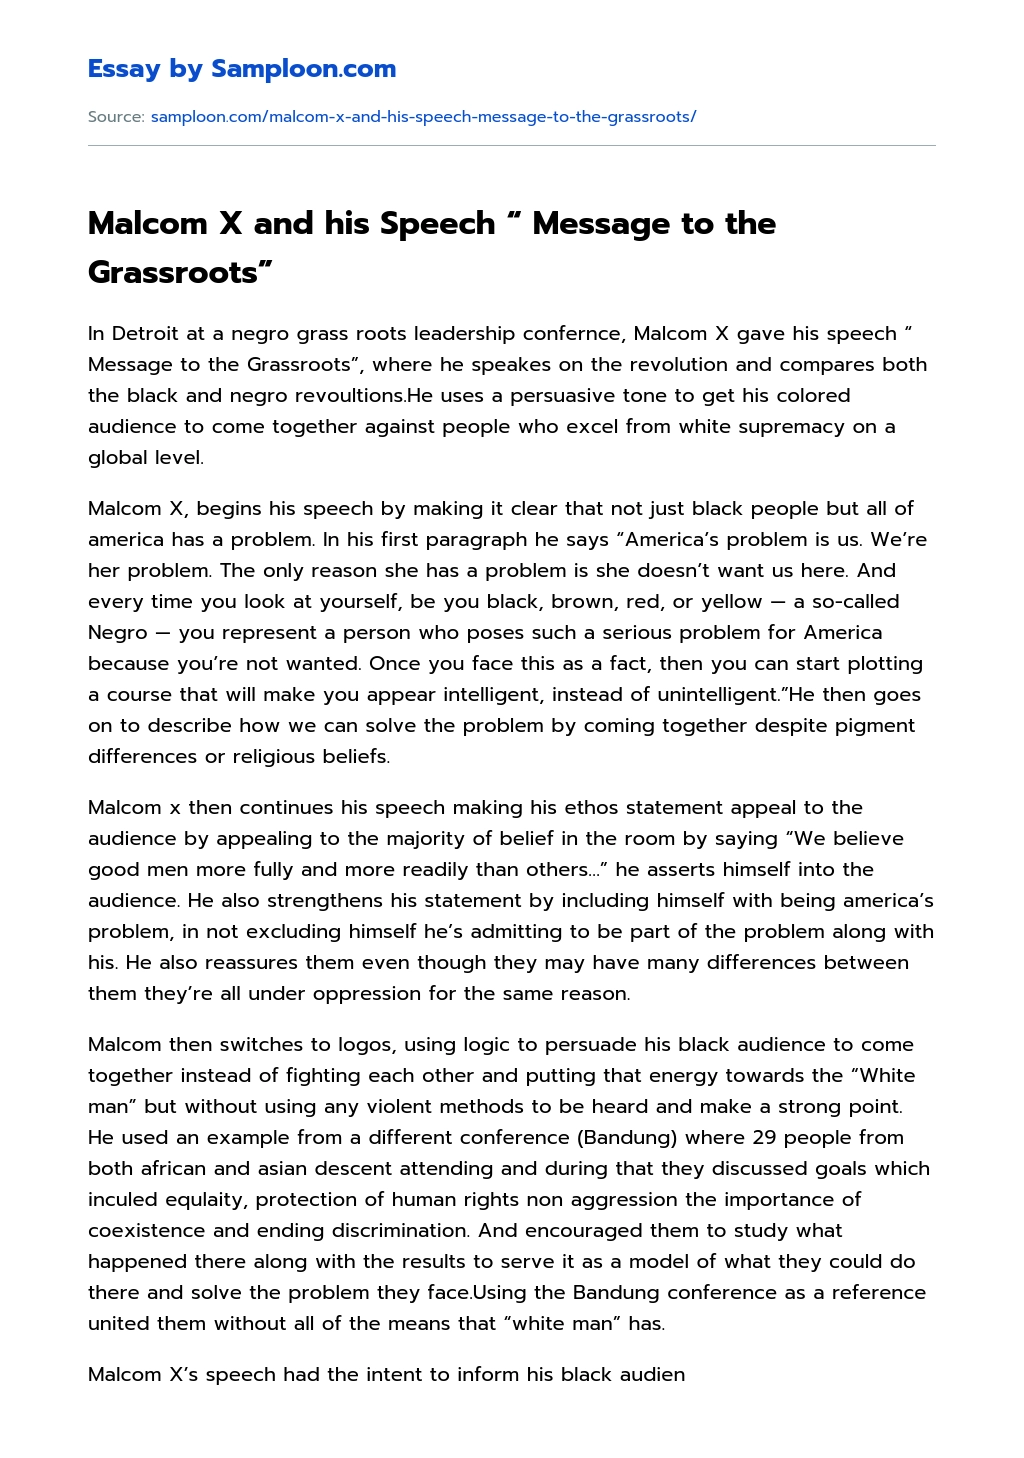 Malcom X and his Speech “ Message to the Grassroots” essay